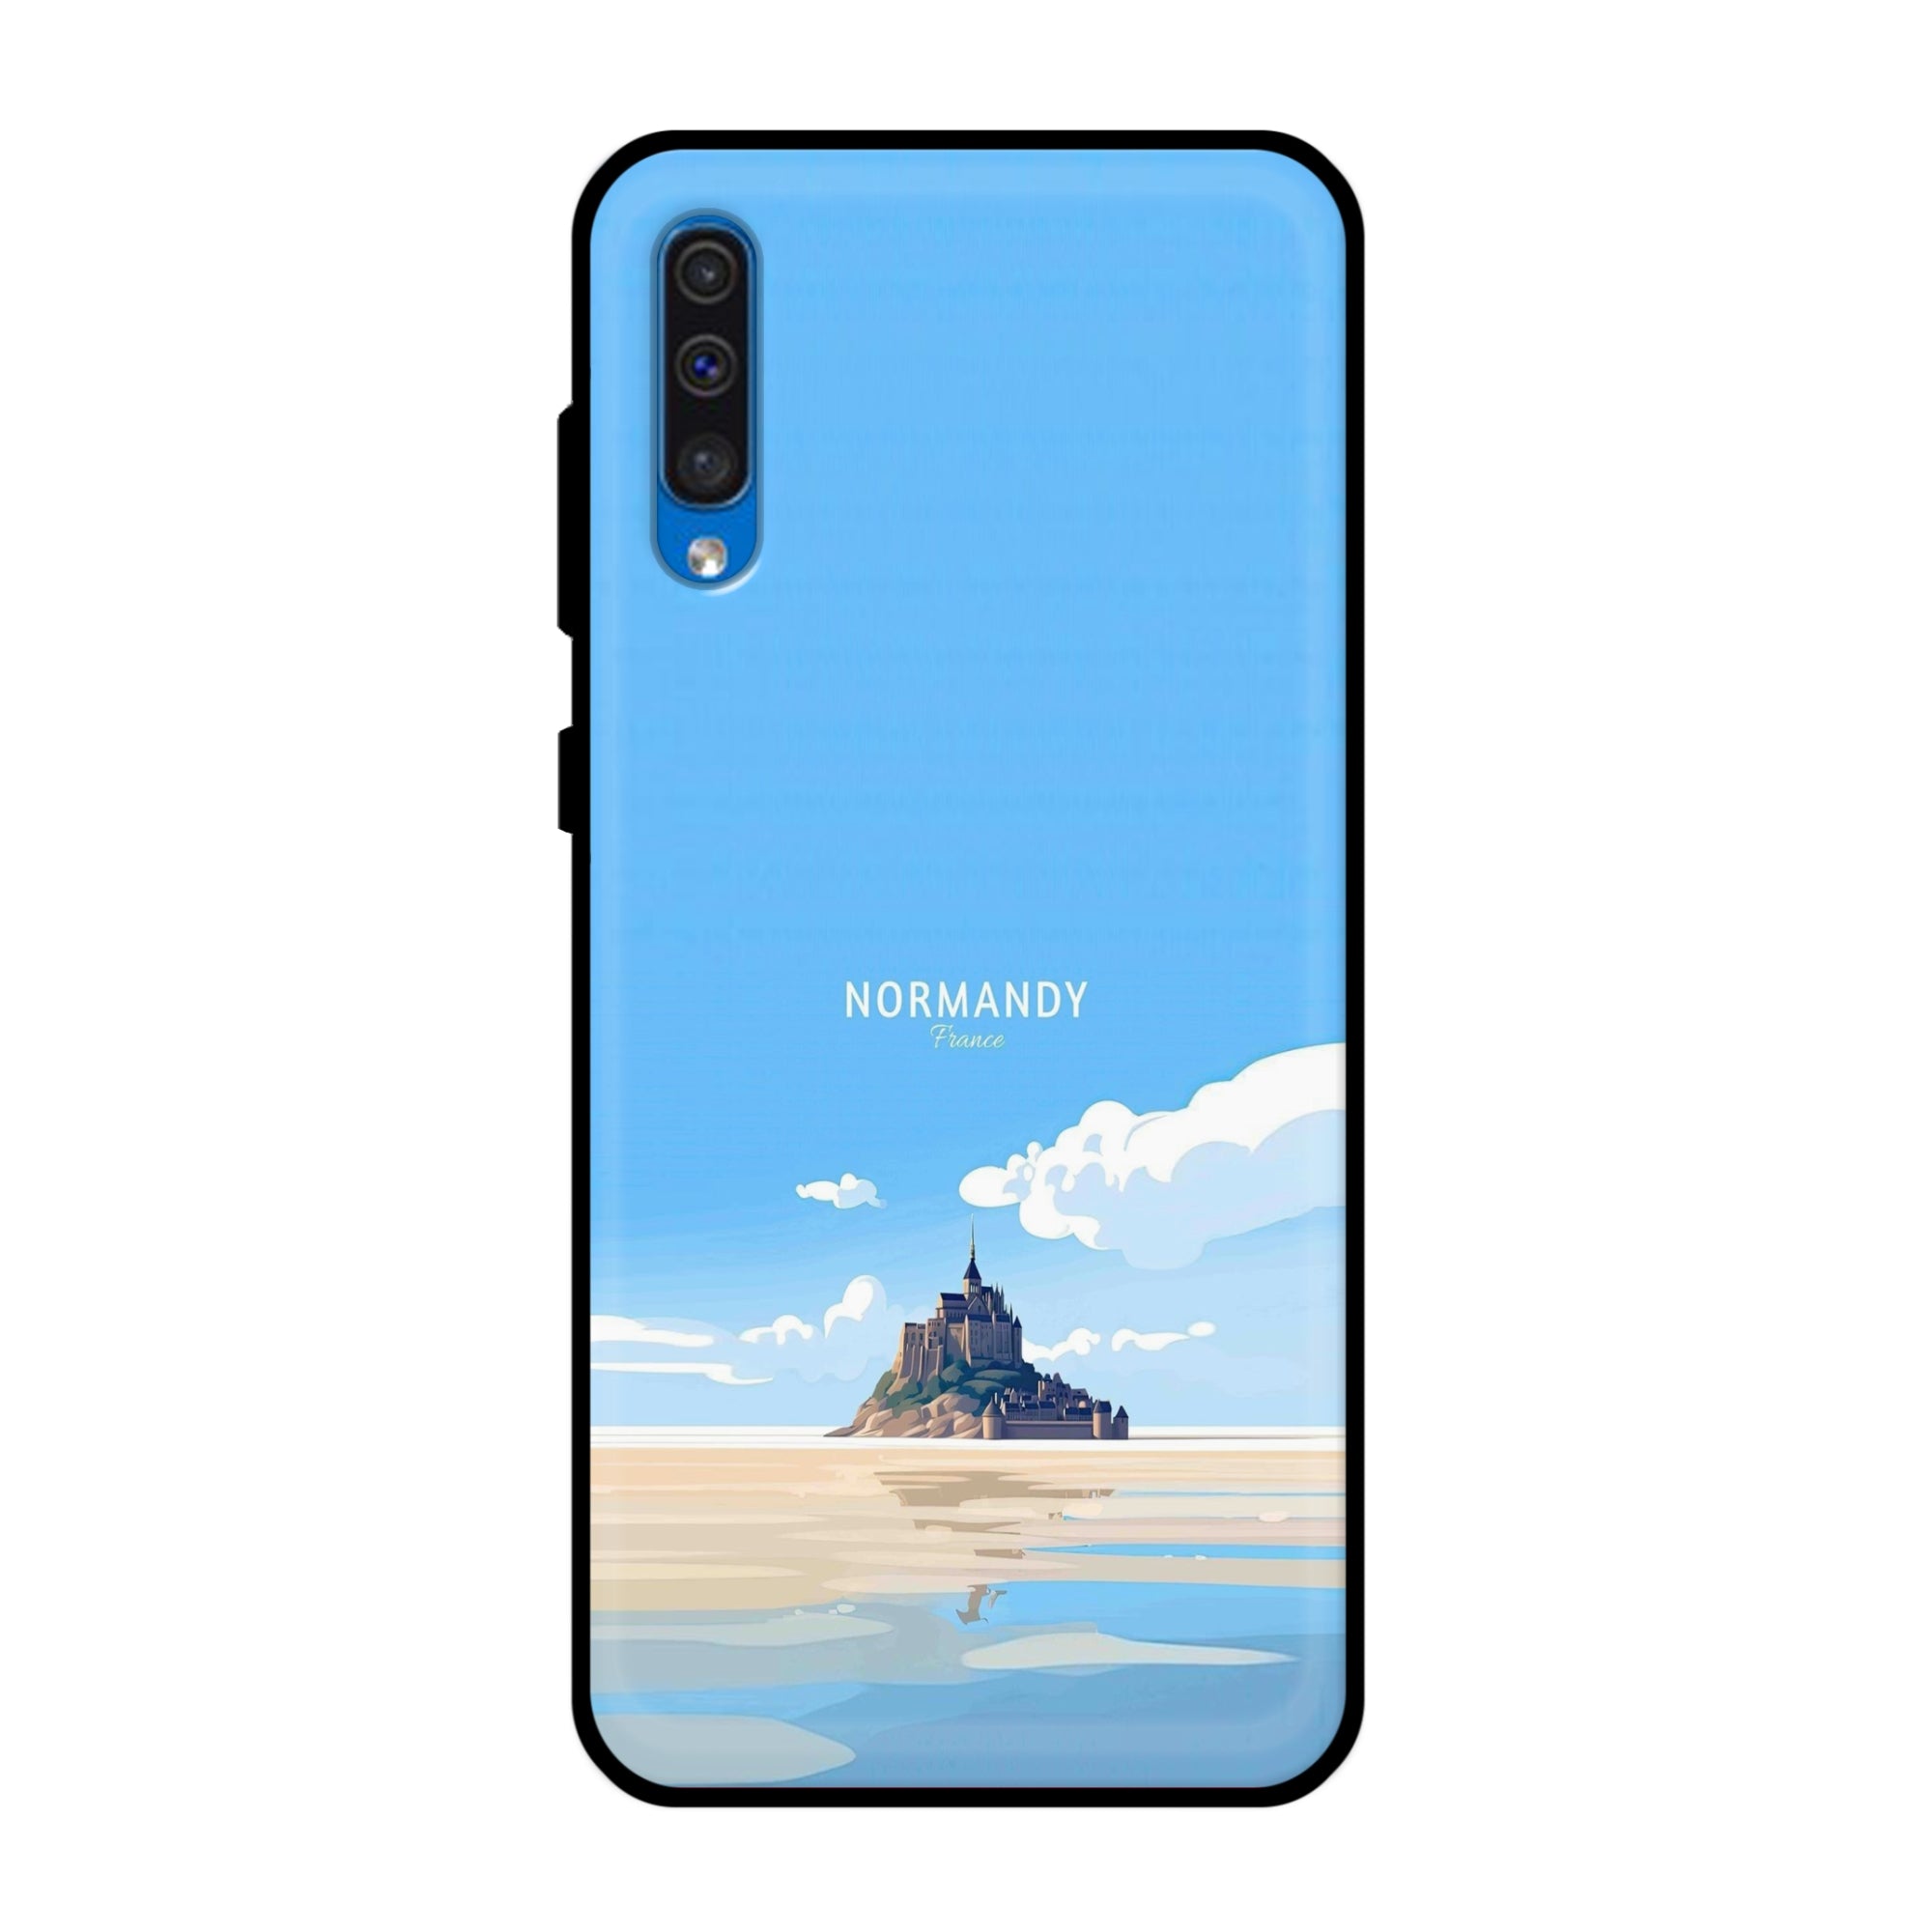 Buy Normandy Metal-Silicon Back Mobile Phone Case/Cover For Samsung Galaxy A50 / A50s / A30s Online